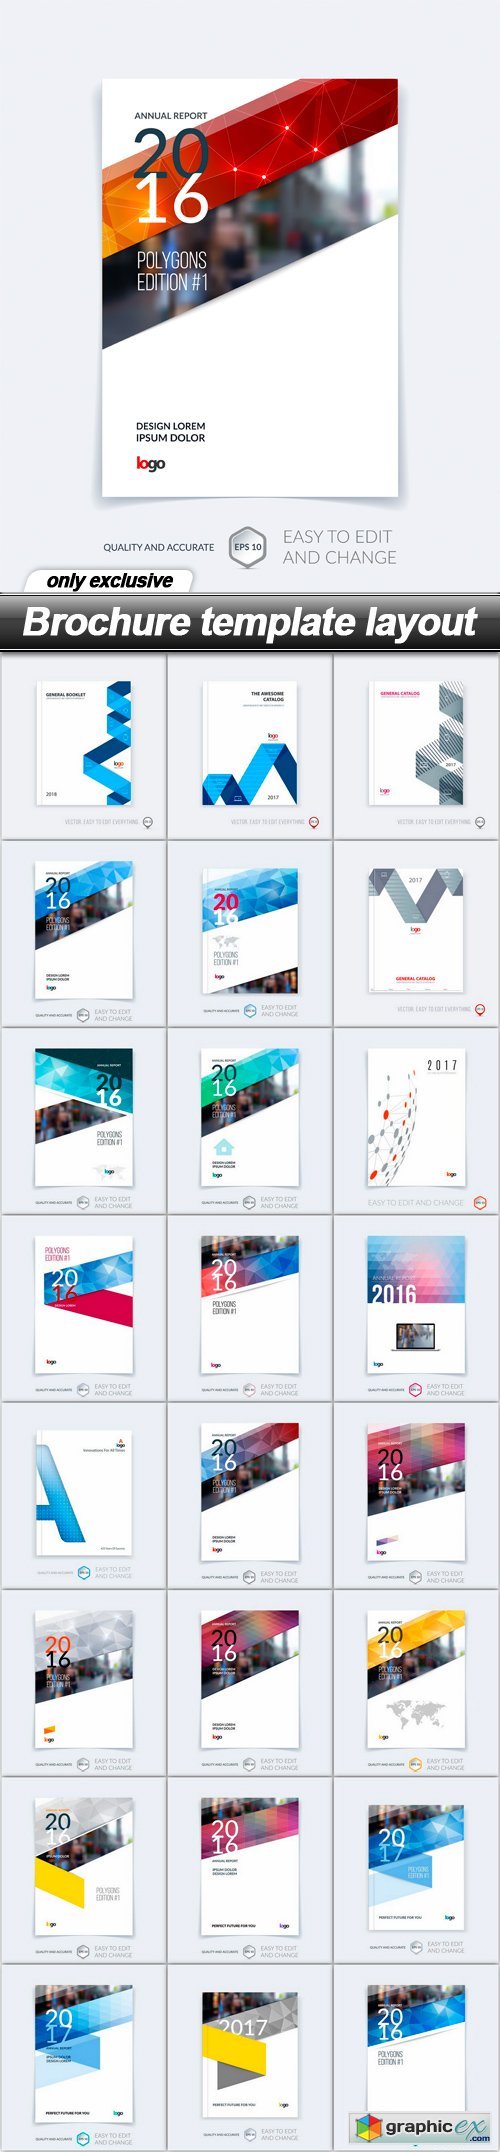 Brochure template layout - 25 EPS